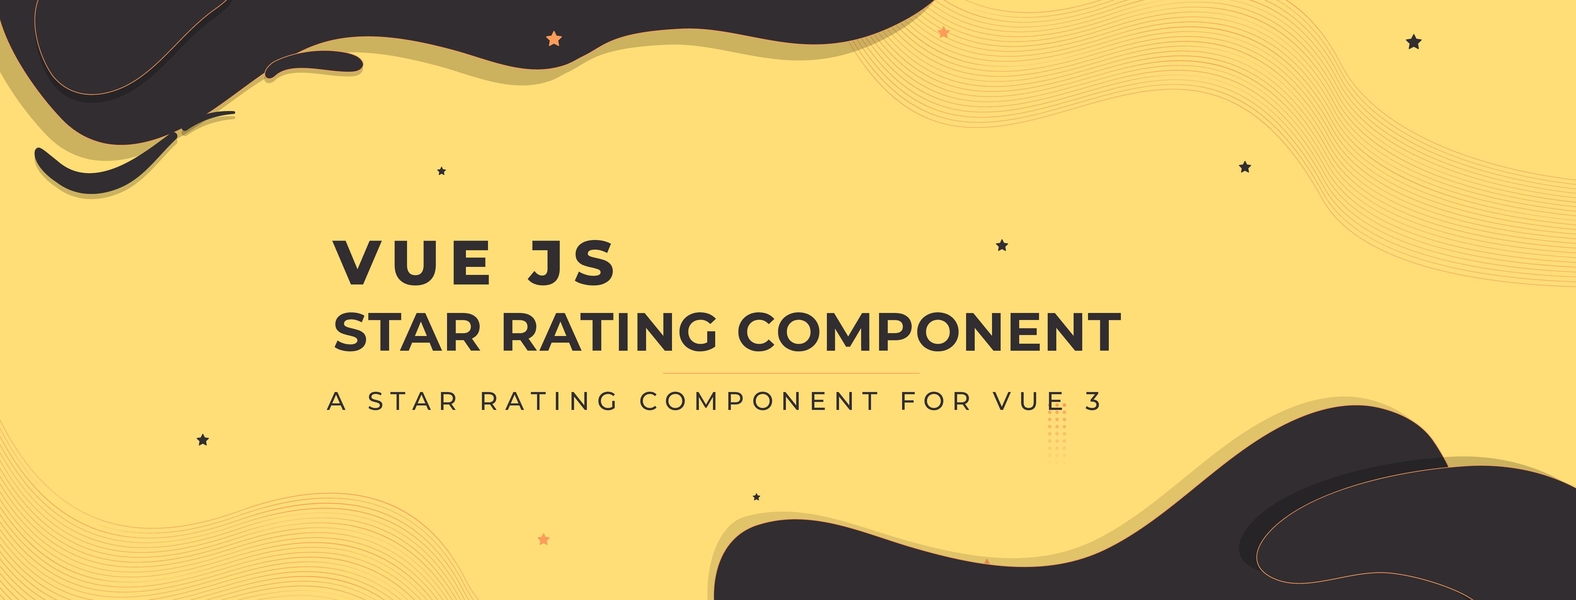 A customizable Star Rating Component Made with Vue Js